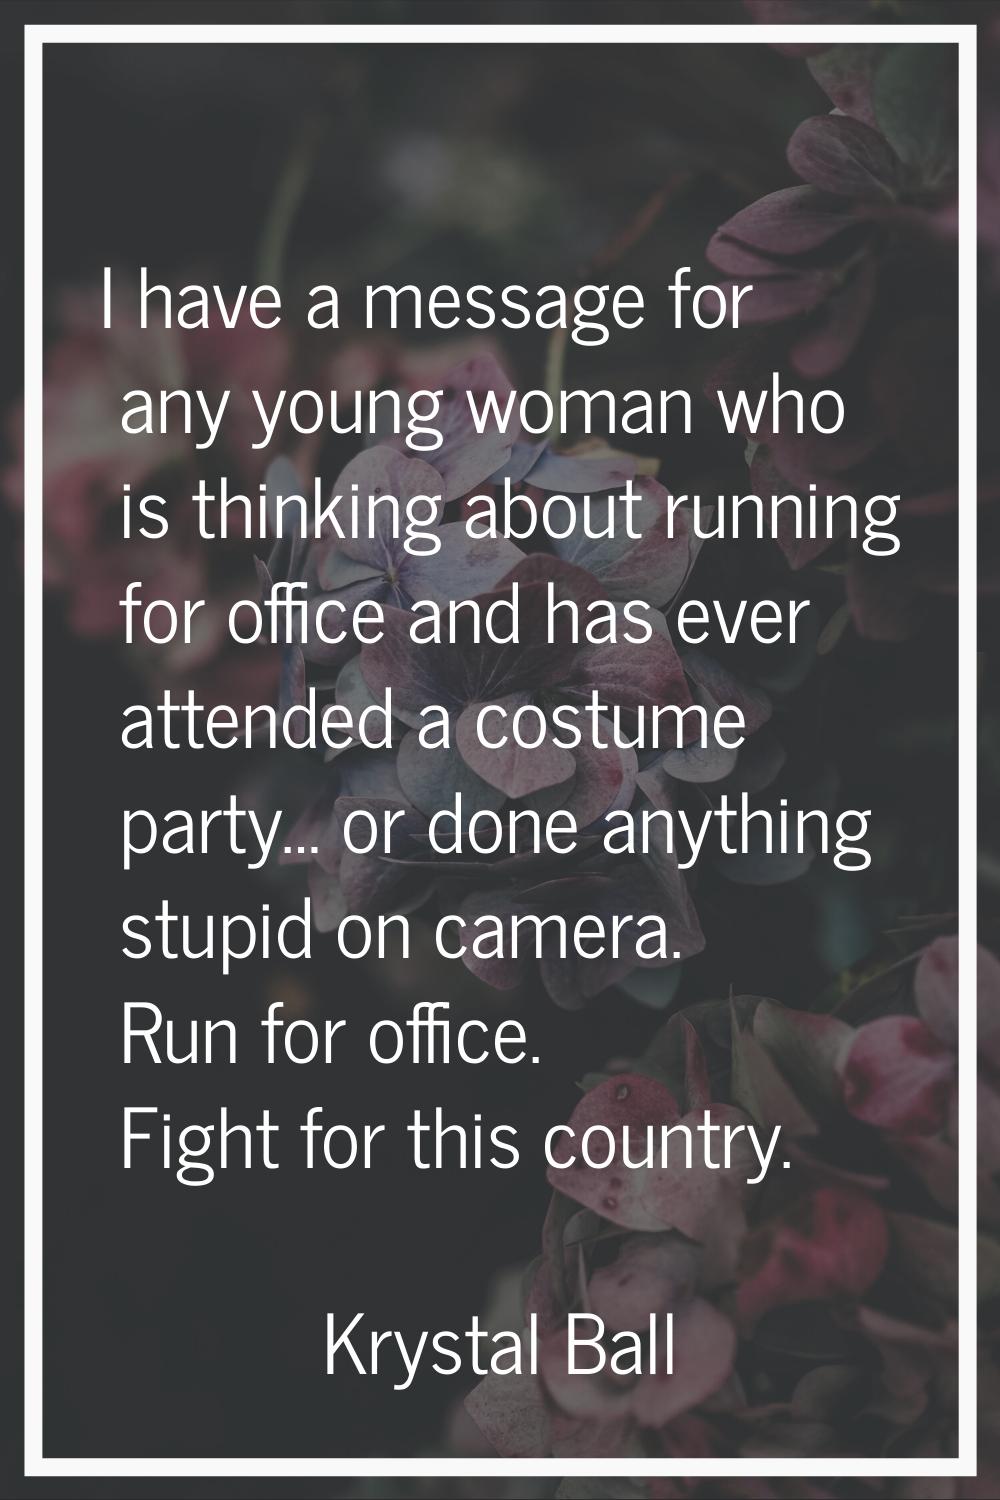 I have a message for any young woman who is thinking about running for office and has ever attended